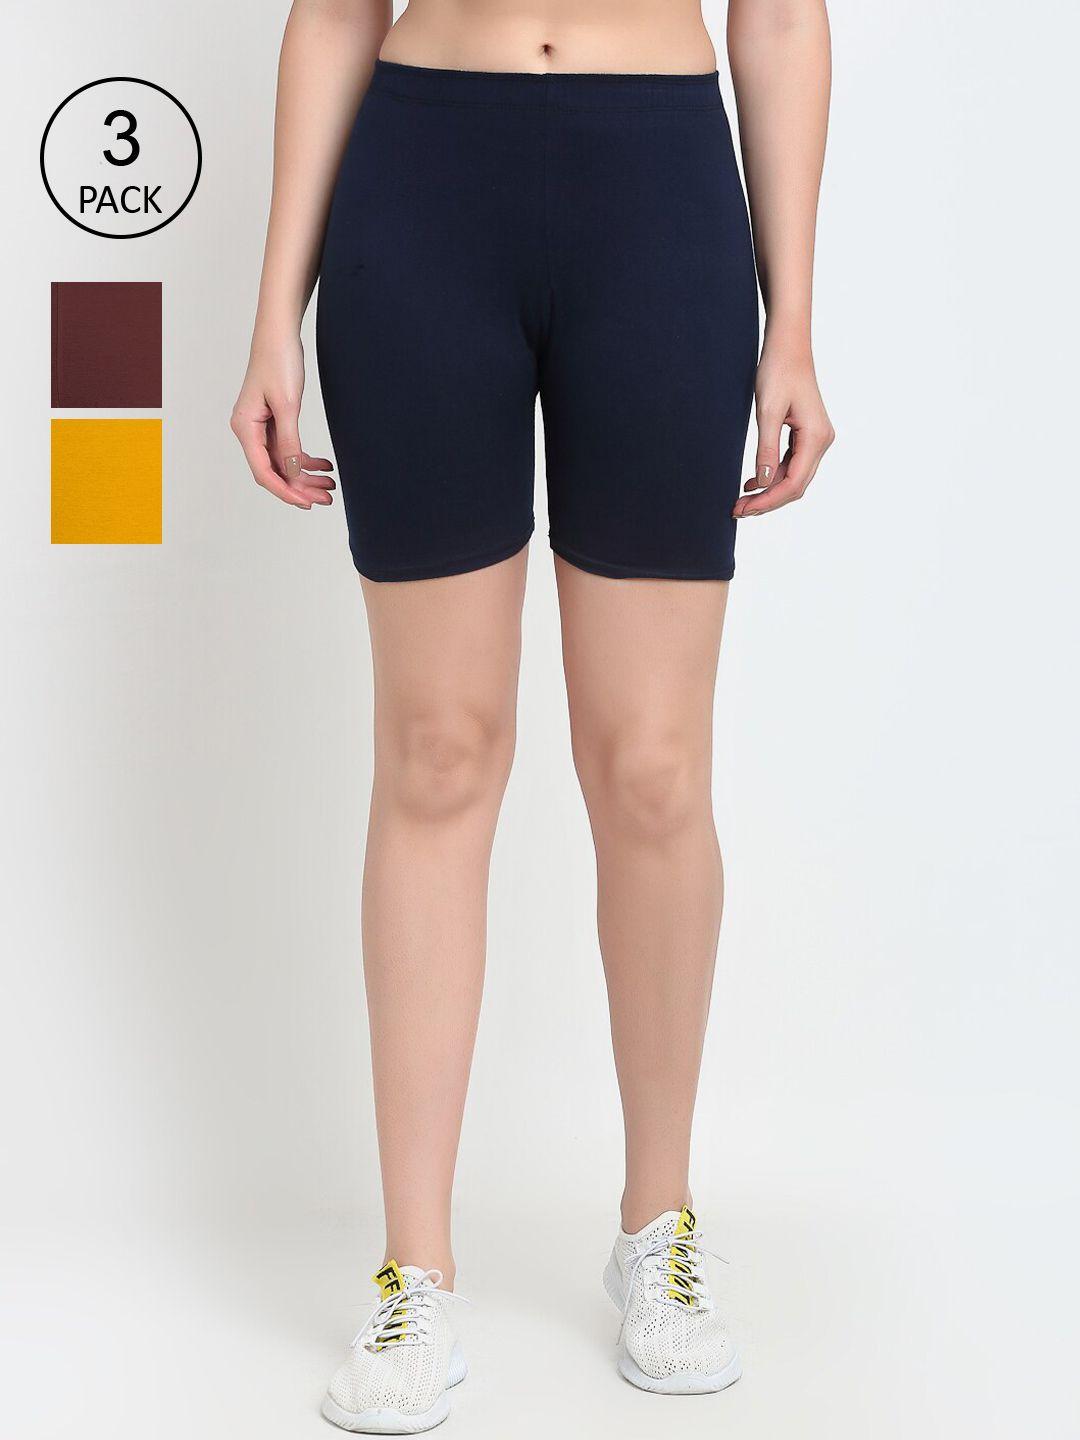 gracit-pack-of-3-women-navy-blue-cycling-sports-shorts